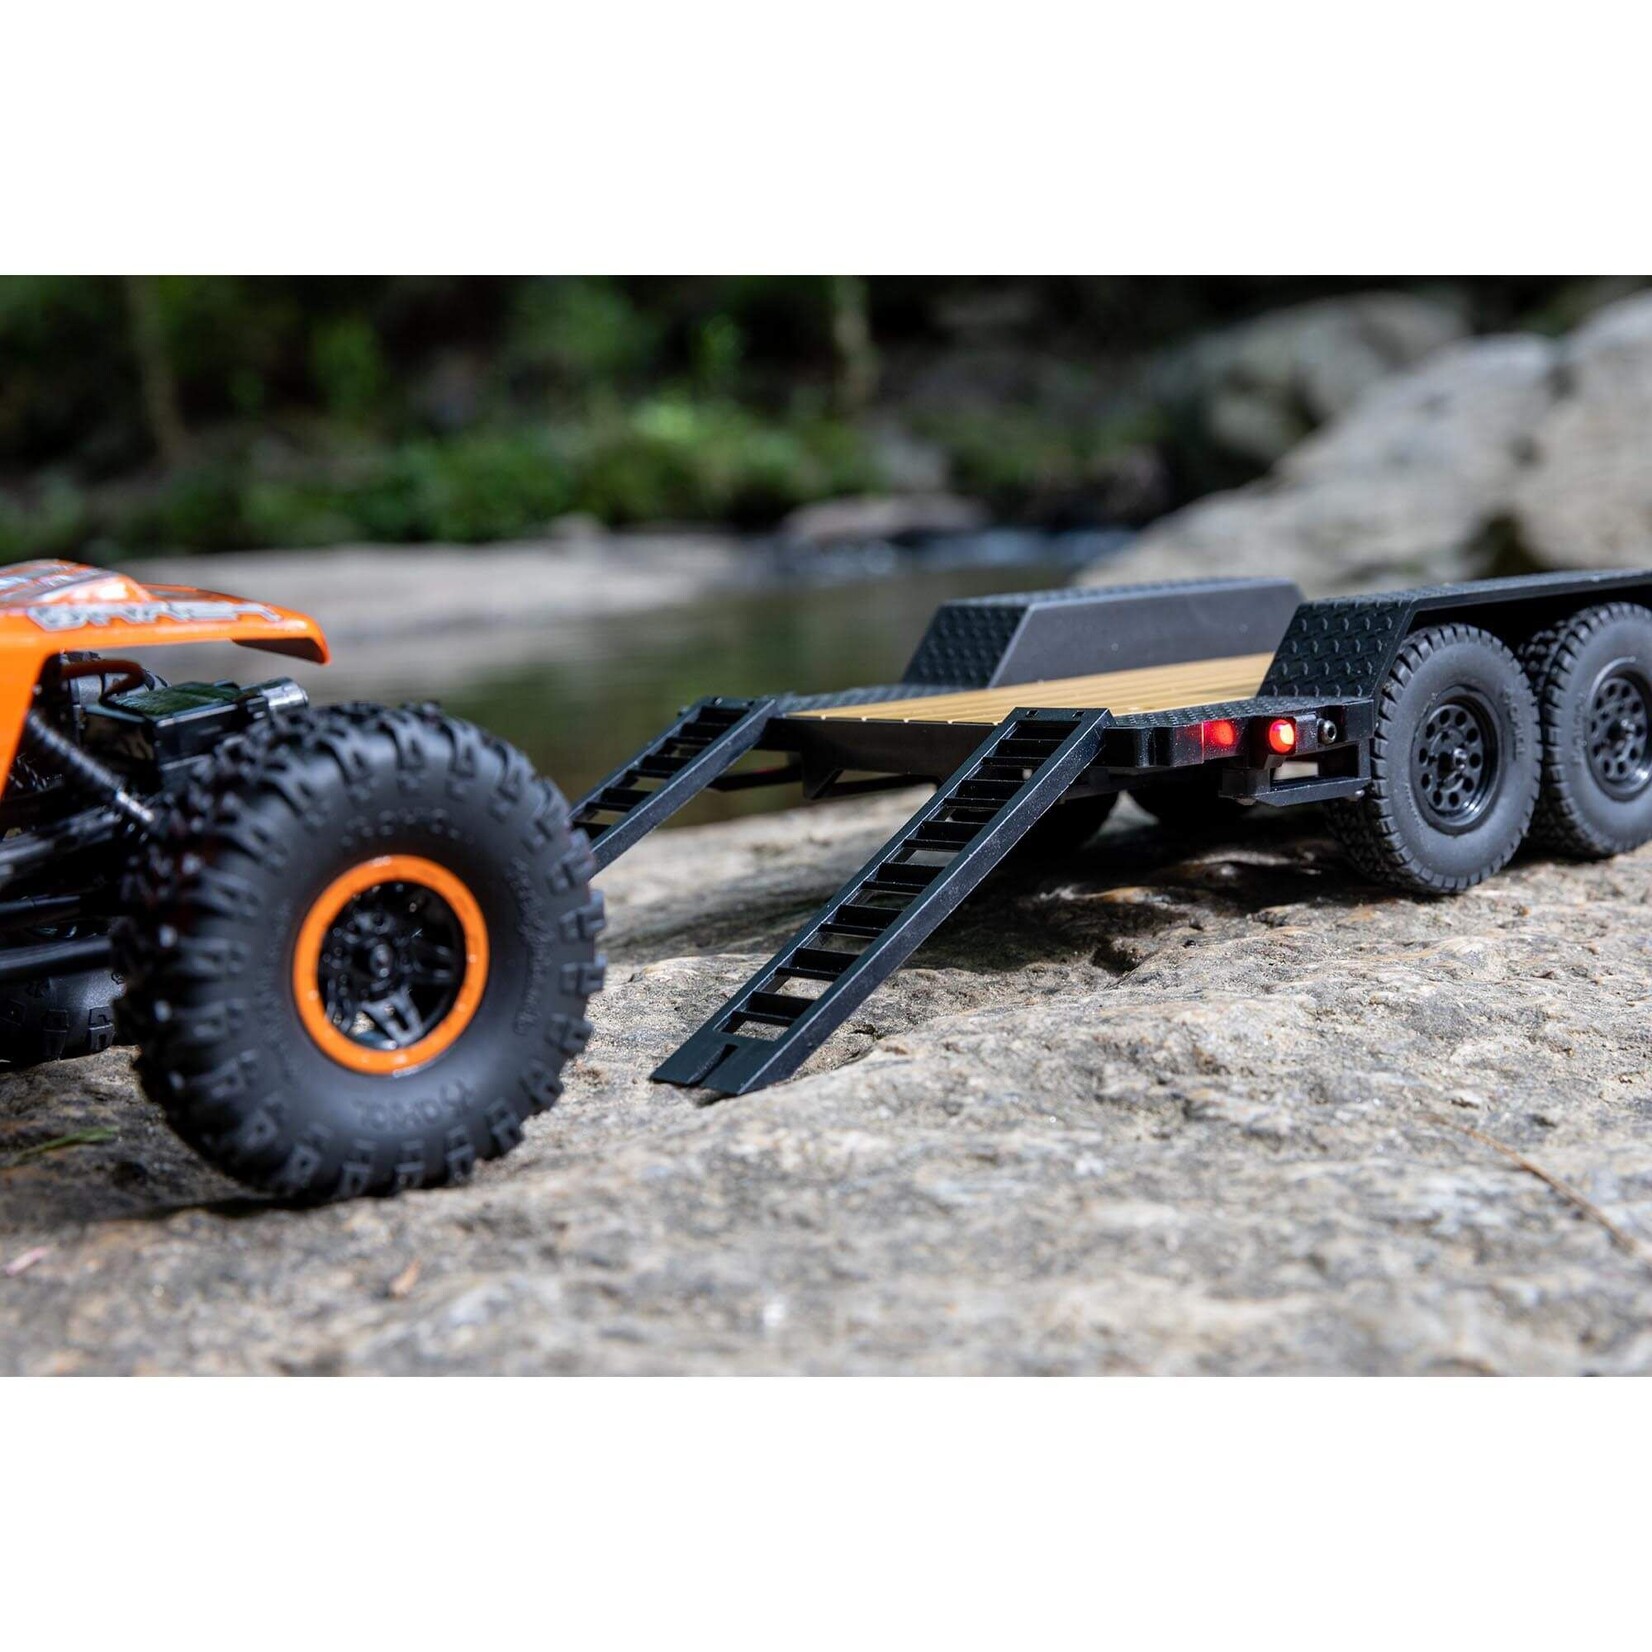 Axial 1/24 SCX24 Flat Bed Vehicle Trailer